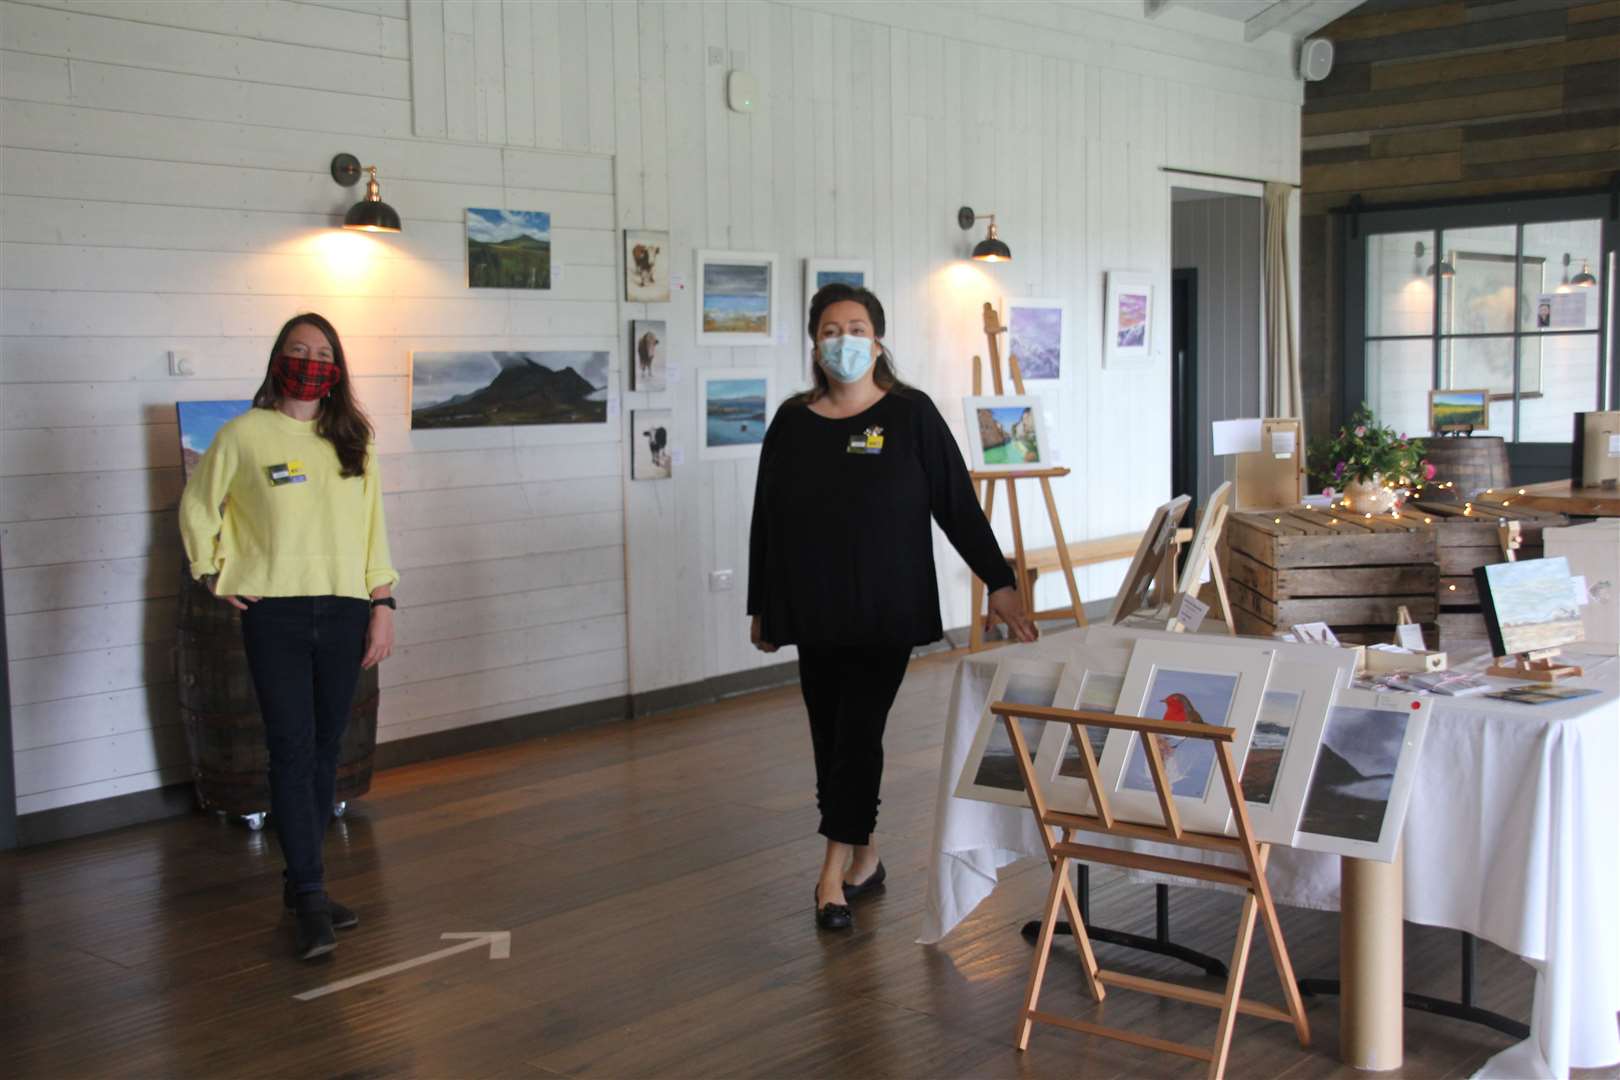 Artists Fiona Sinclair and Jenni Prentice are displaying their work at Barra Castle.